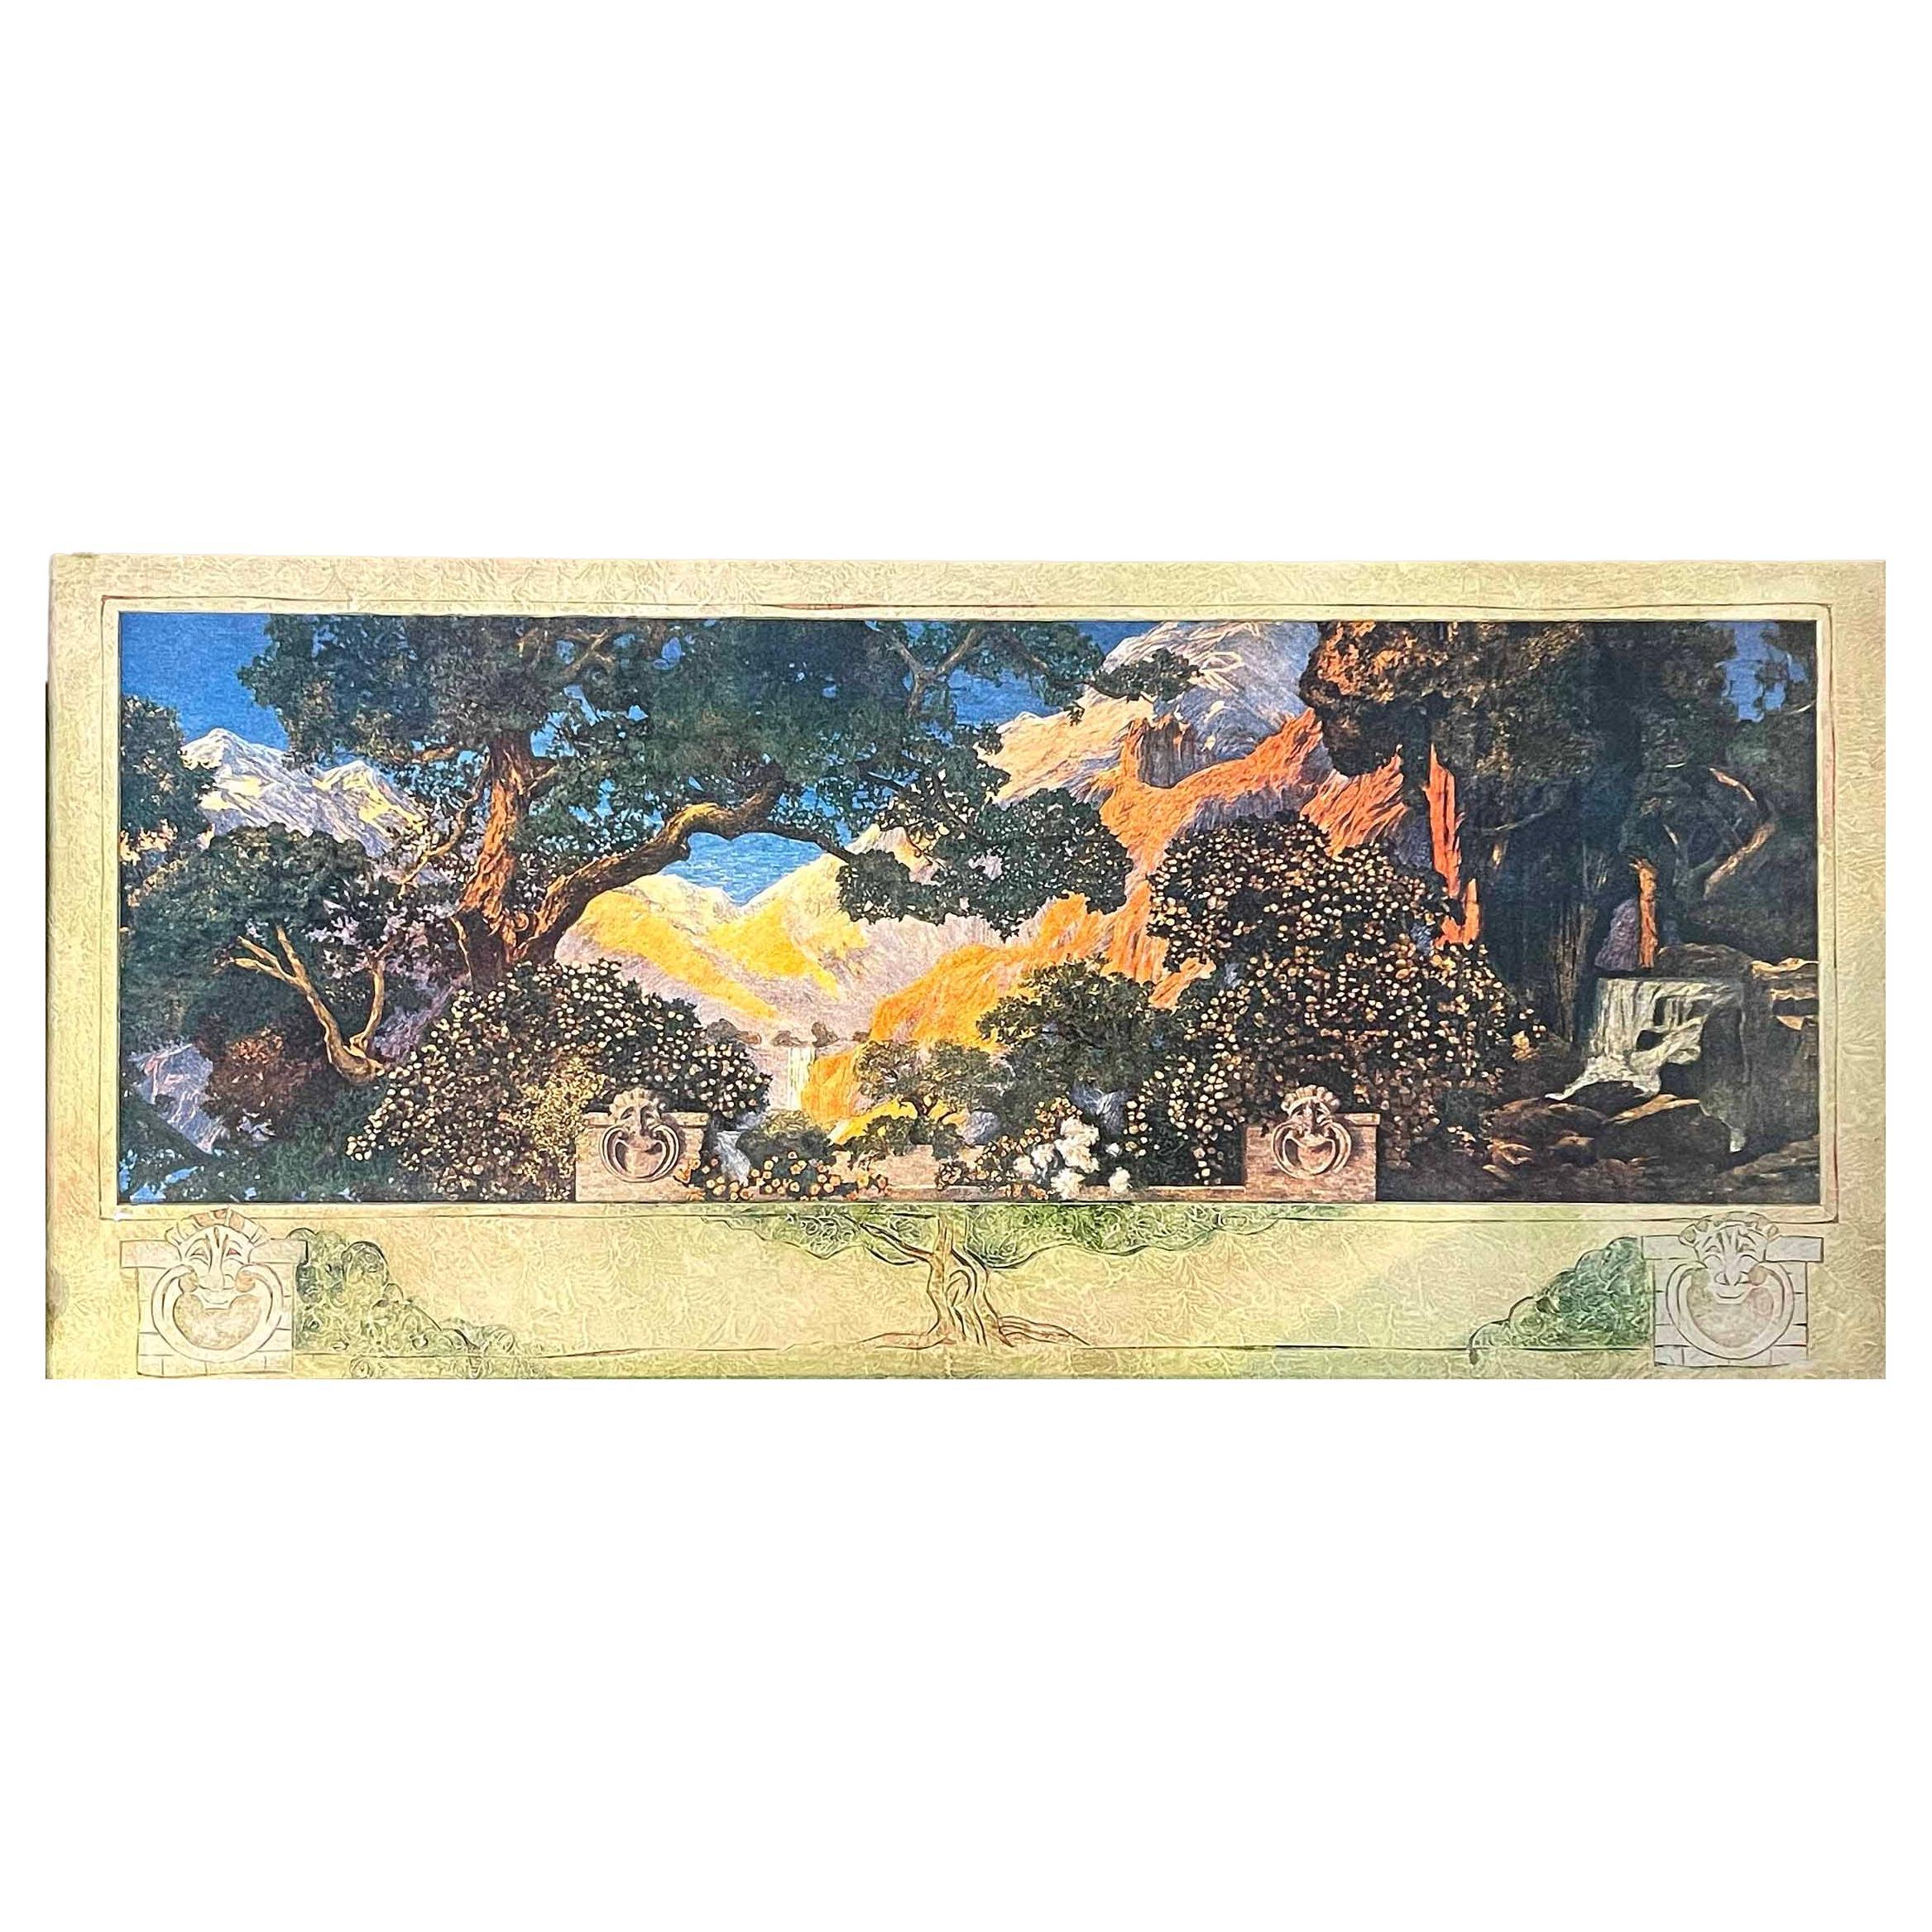 This extraordinary paean to Maxfield Parrish brings together an original, 1920s print featuring the 